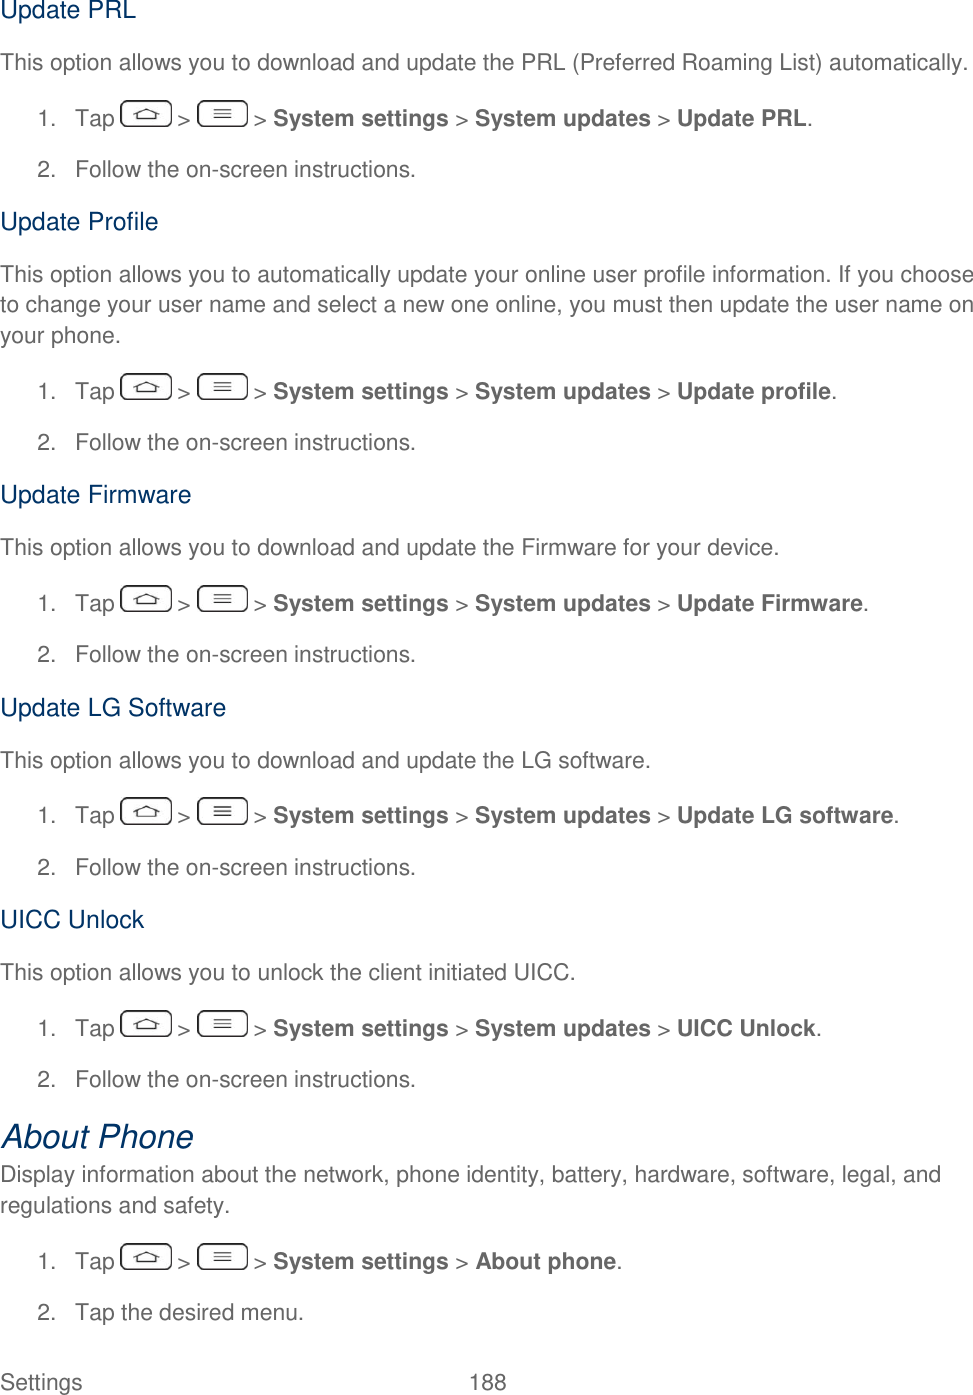  Settings  188   Update PRL This option allows you to download and update the PRL (Preferred Roaming List) automatically. 1.  Tap   &gt;   &gt; System settings &gt; System updates &gt; Update PRL. 2.  Follow the on-screen instructions. Update Profile This option allows you to automatically update your online user profile information. If you choose to change your user name and select a new one online, you must then update the user name on your phone. 1.  Tap   &gt;   &gt; System settings &gt; System updates &gt; Update profile. 2.  Follow the on-screen instructions. Update Firmware This option allows you to download and update the Firmware for your device. 1.  Tap   &gt;   &gt; System settings &gt; System updates &gt; Update Firmware. 2.  Follow the on-screen instructions. Update LG Software This option allows you to download and update the LG software. 1.  Tap   &gt;   &gt; System settings &gt; System updates &gt; Update LG software. 2.  Follow the on-screen instructions. UICC Unlock This option allows you to unlock the client initiated UICC. 1.  Tap   &gt;   &gt; System settings &gt; System updates &gt; UICC Unlock. 2.  Follow the on-screen instructions. About Phone Display information about the network, phone identity, battery, hardware, software, legal, and regulations and safety. 1.  Tap   &gt;   &gt; System settings &gt; About phone. 2.  Tap the desired menu. 